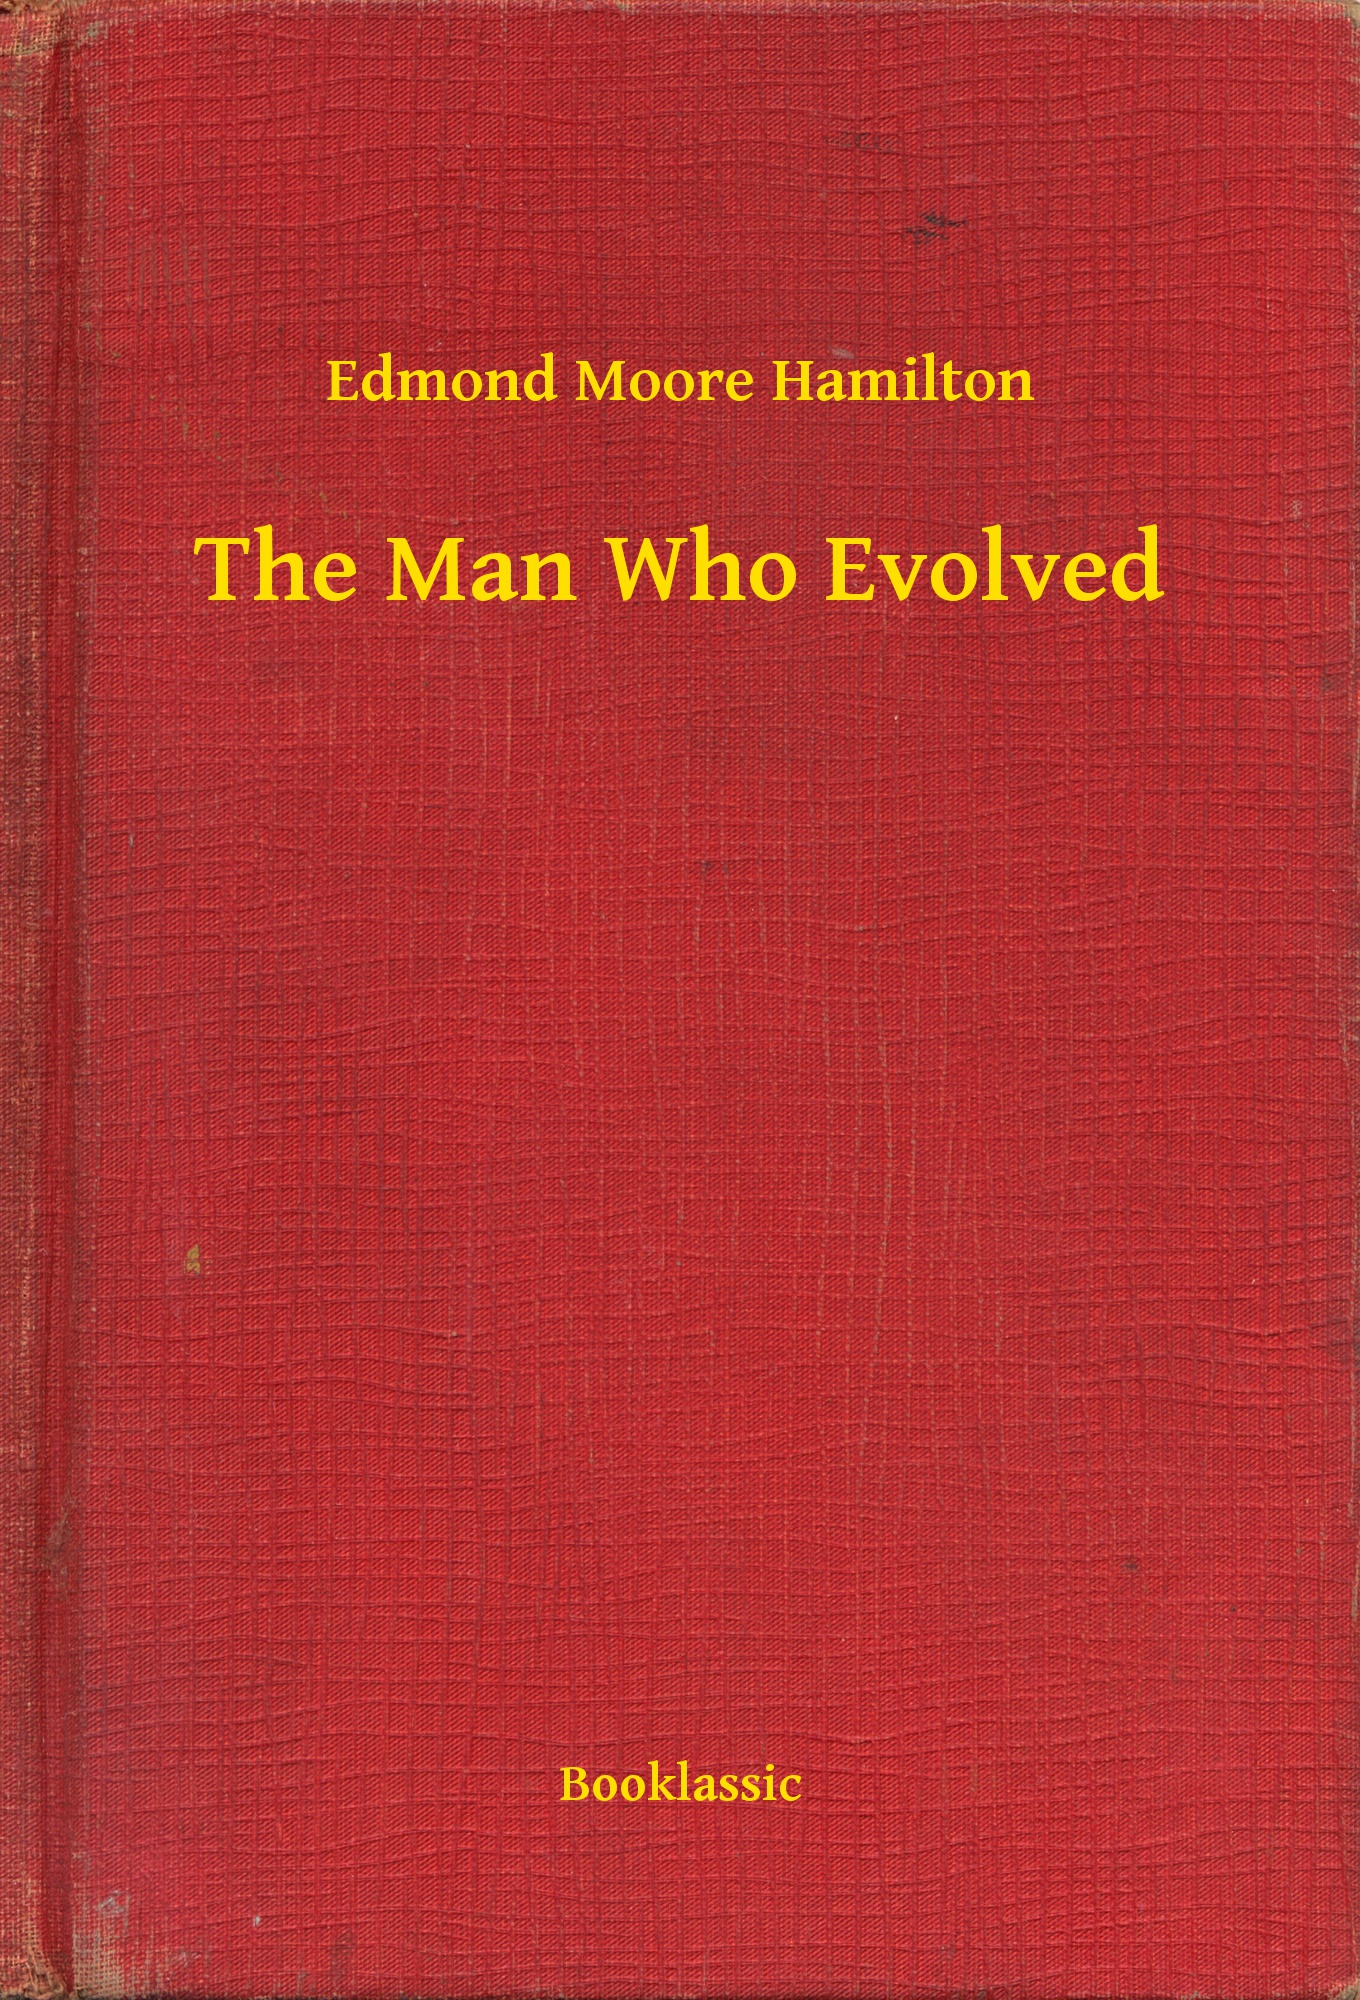 The Man Who Evolved